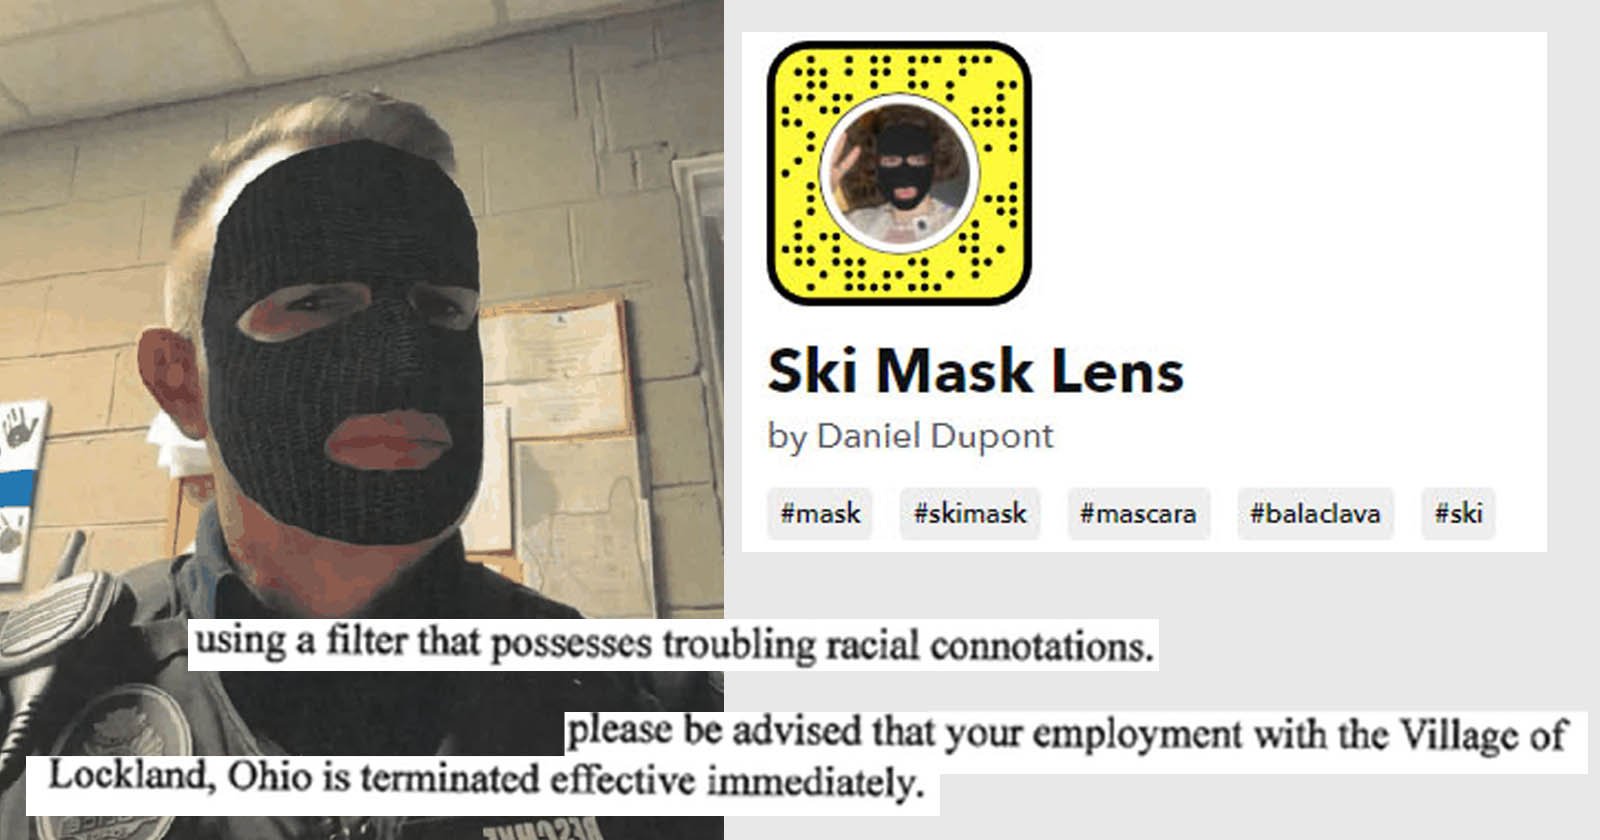 A person wearing a digital ski mask filter from snapchat, titled ski mask lens by daniel dupont, with hashtags and a text overlay regarding termination of employment due to the filter's connotations.